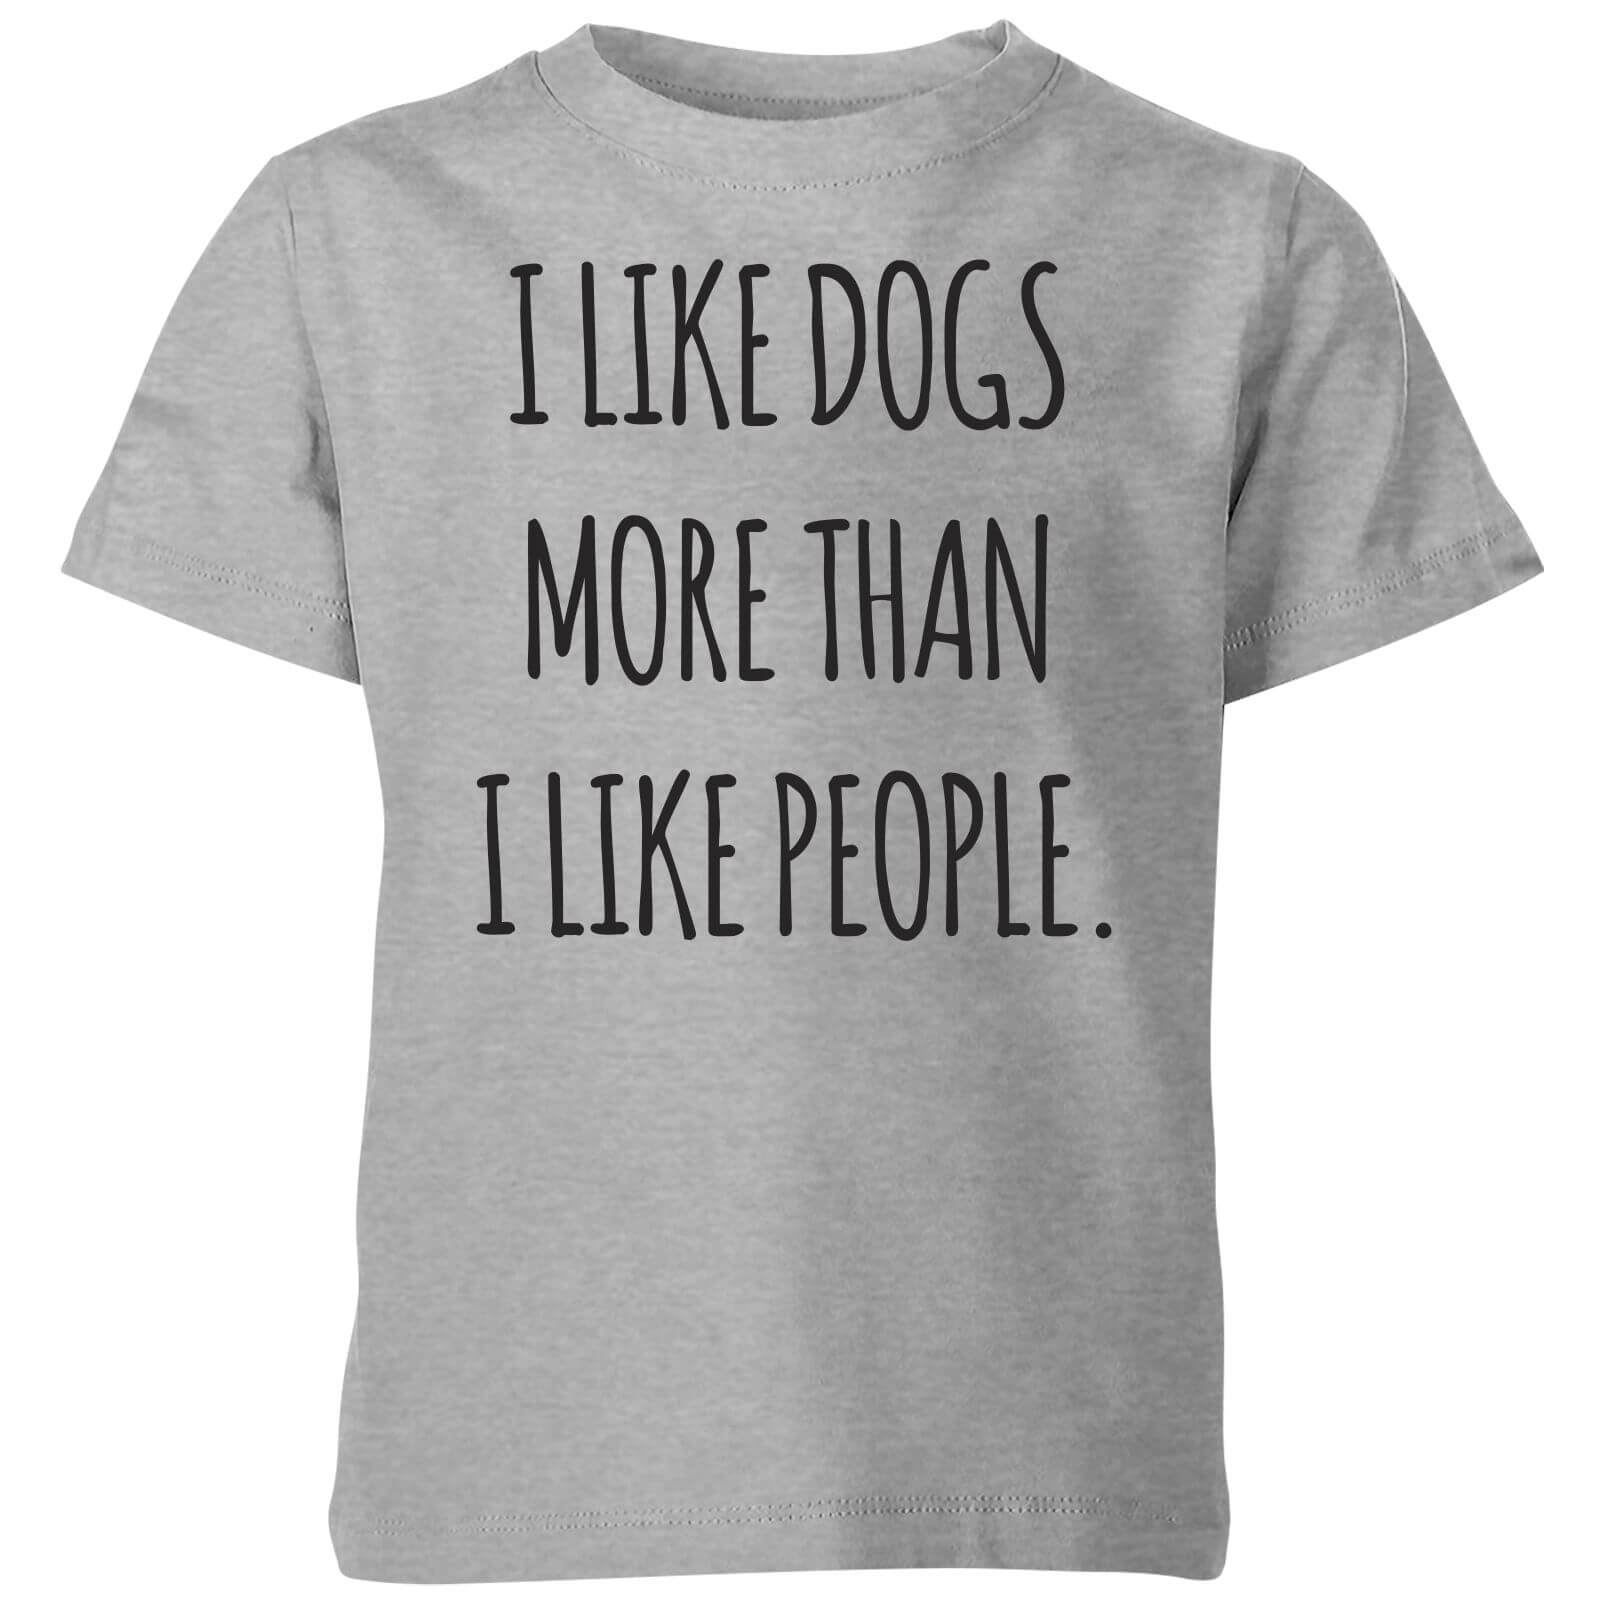 I Like Dogs More Than People Kids' T-Shirt - Grey - 3-4 Years - Grey